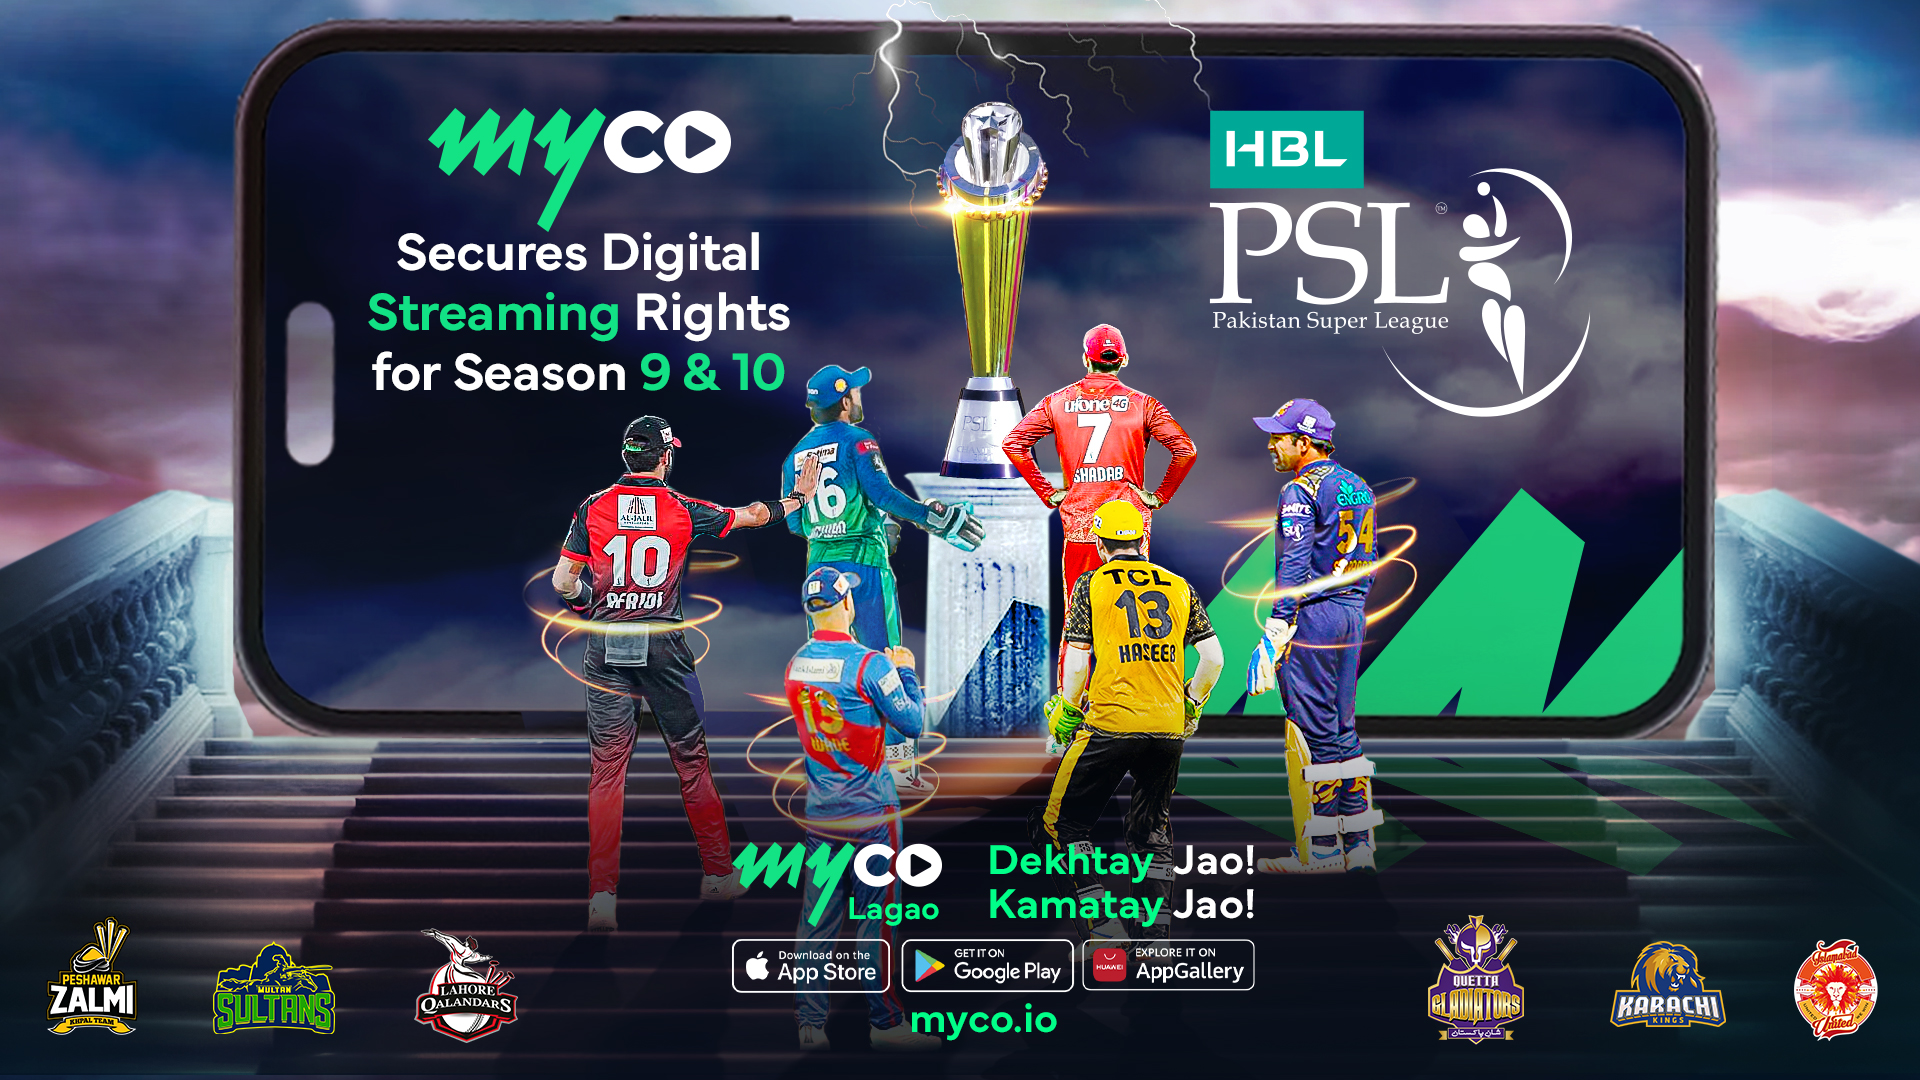 Revolutionizing Cricket Viewing: myco Secures Digital Streaming